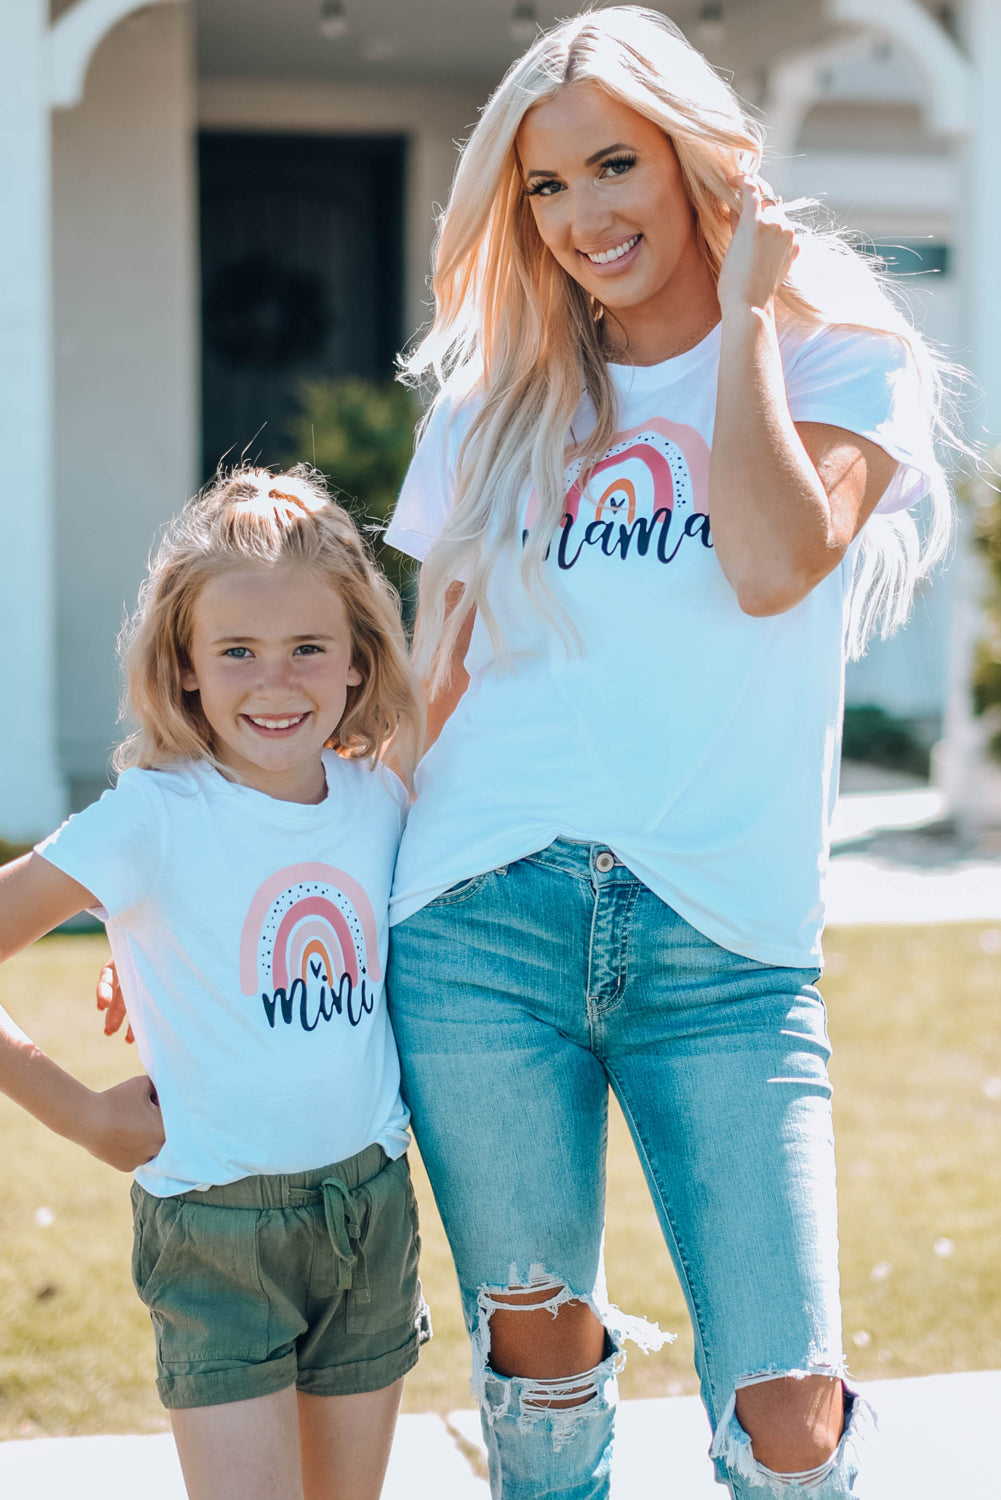 Women Graphic Round Neck Tee Shirt (Mother & Daughter Collection item)